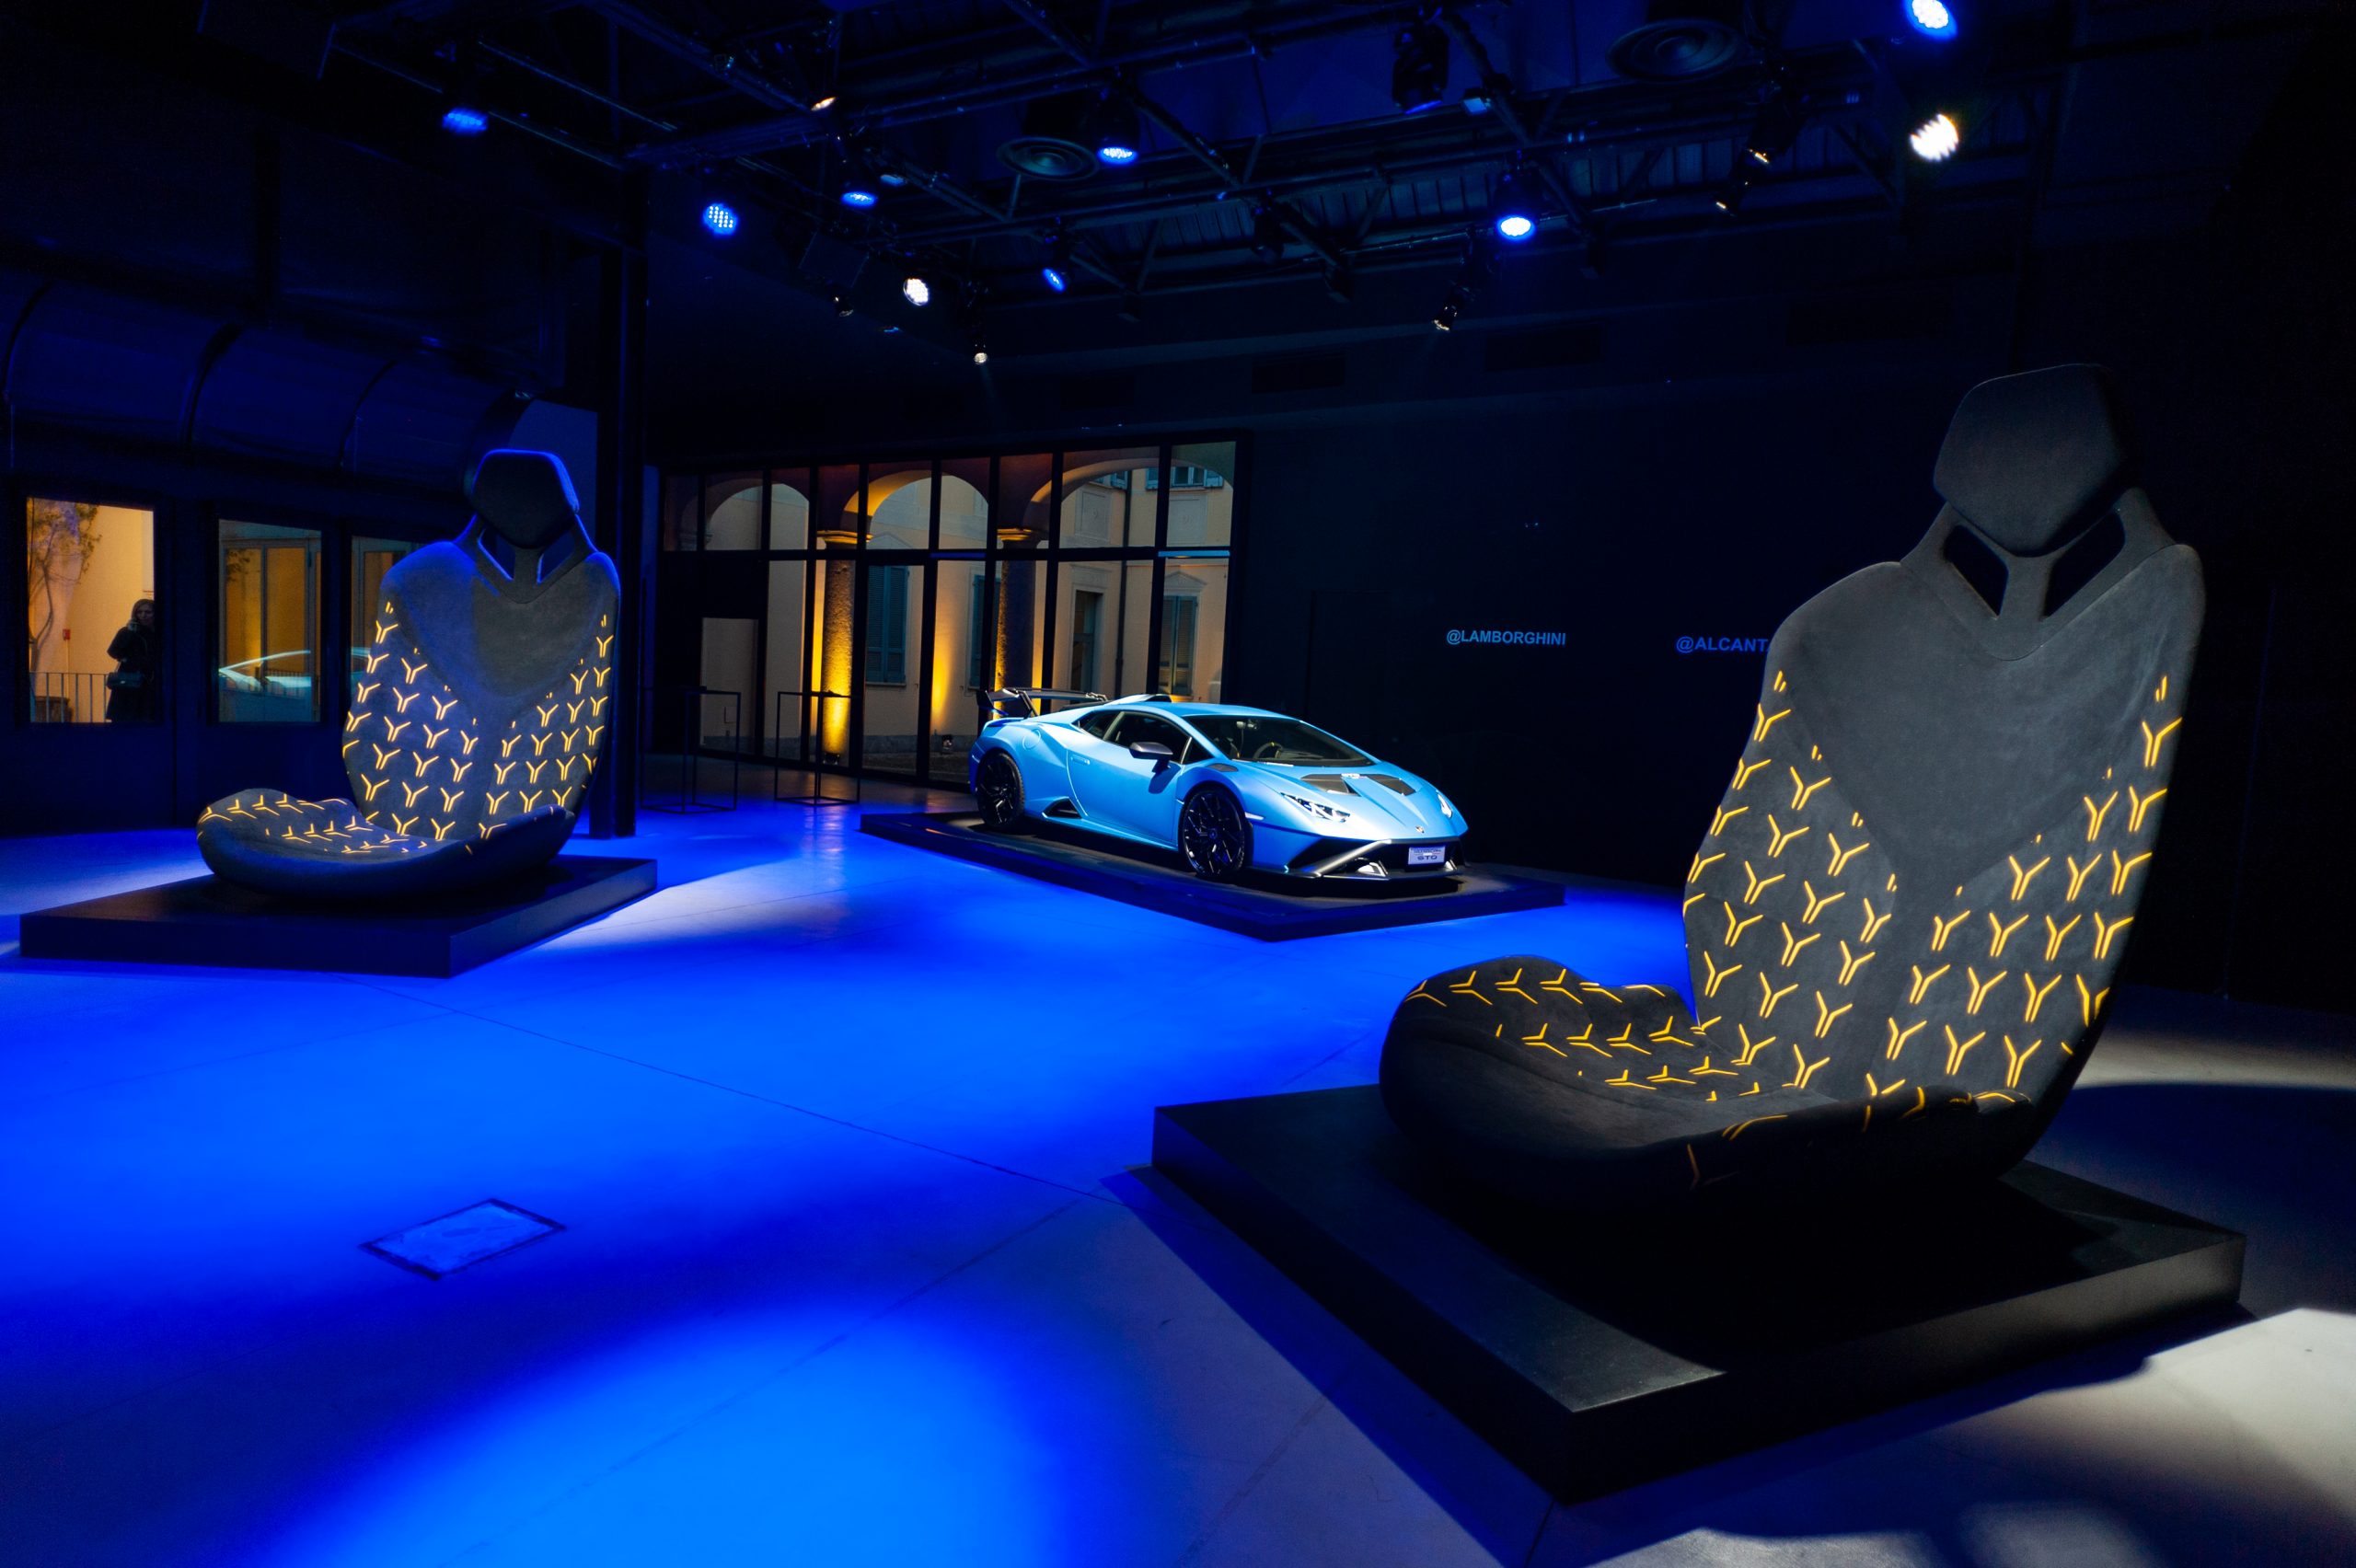 Alcantara in collaboration with Lamborghini for the "Customization is the key" event